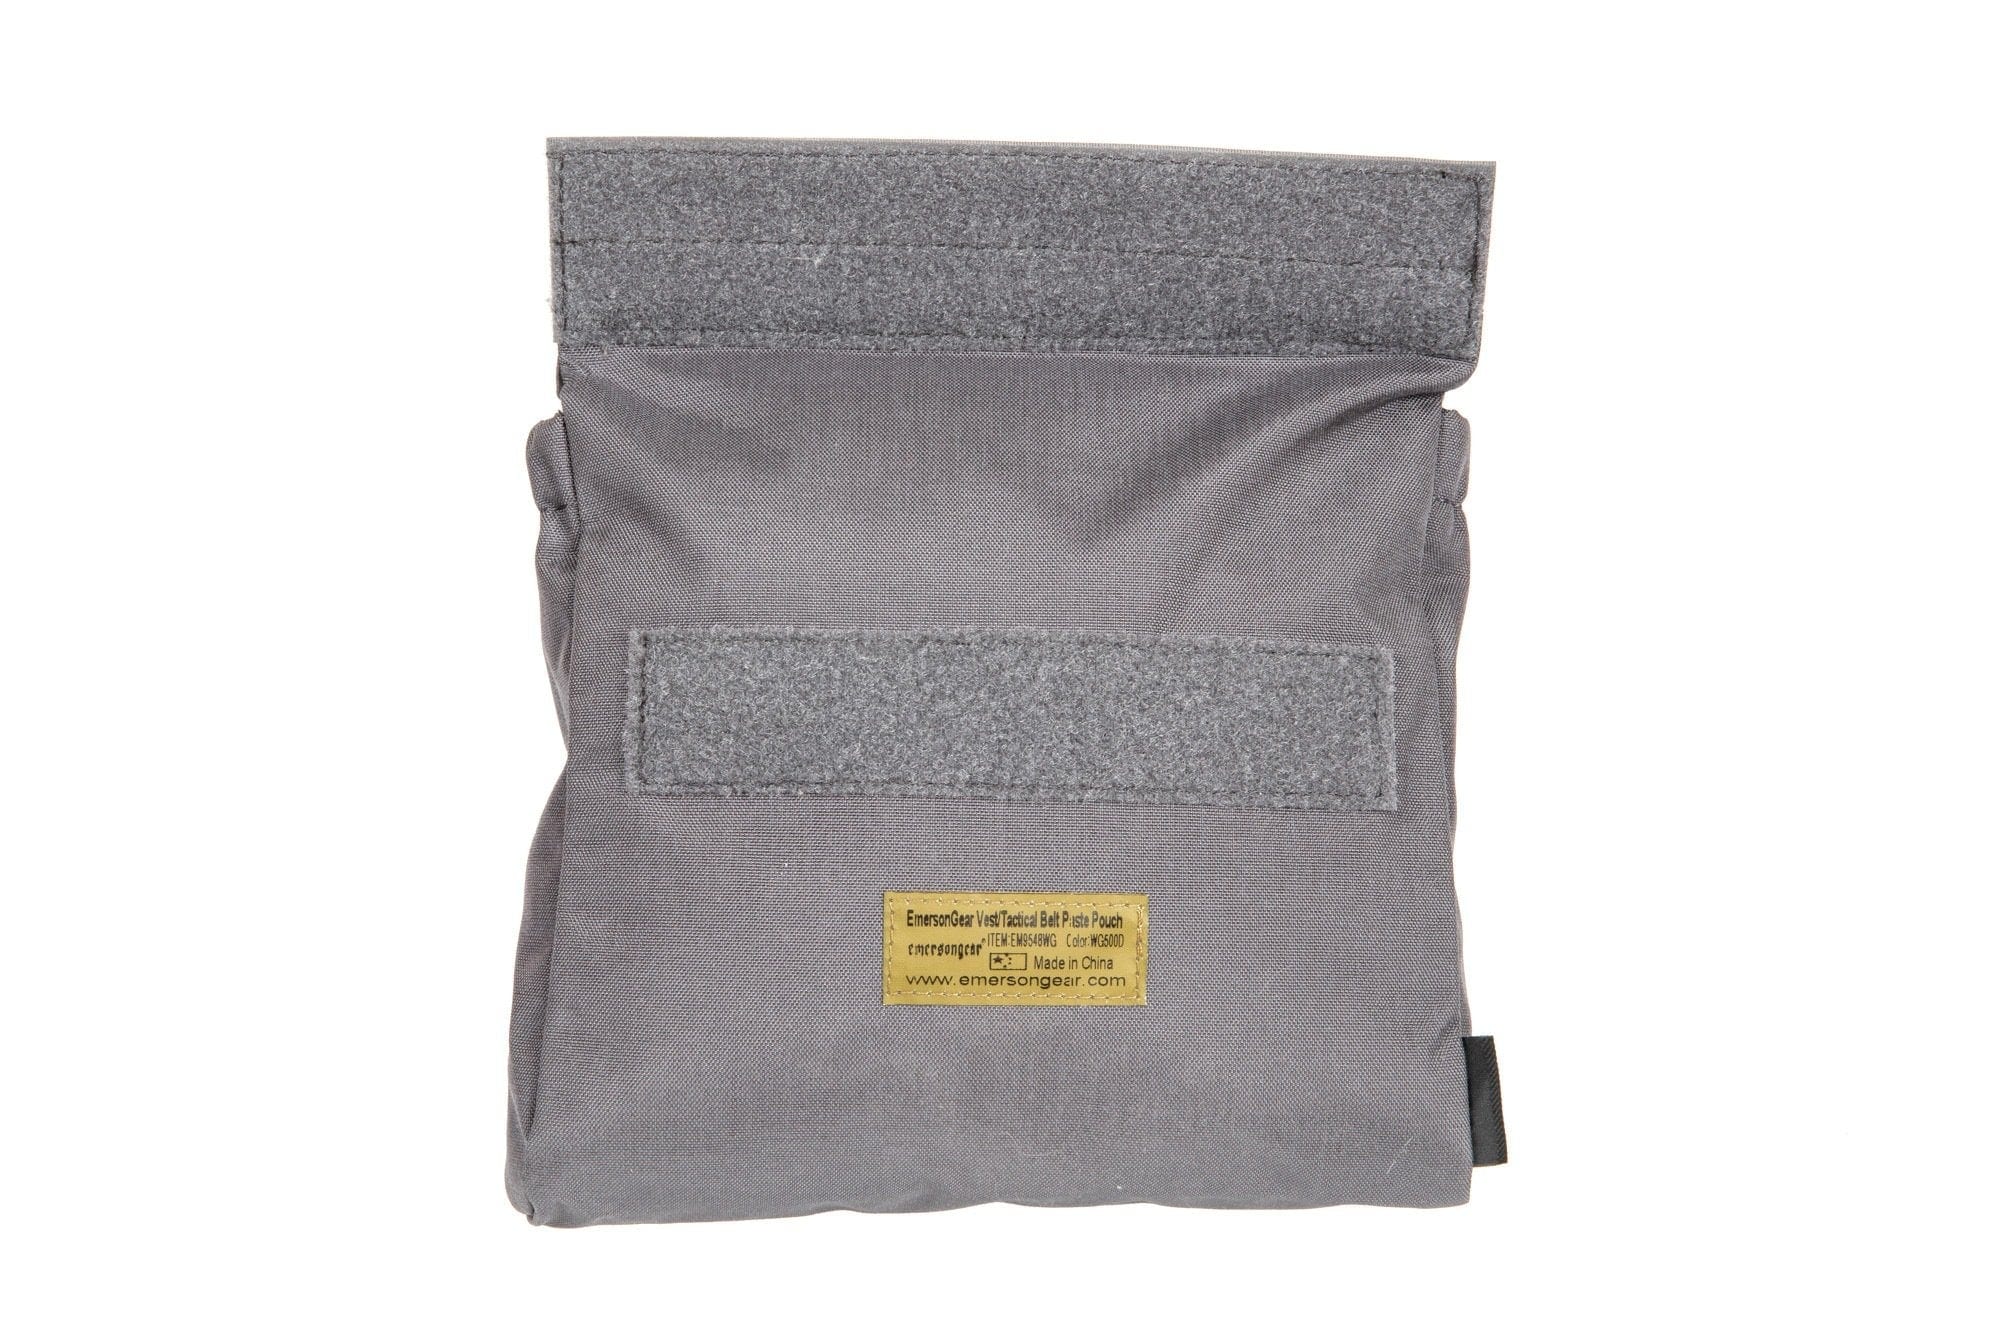 Paste Pouch for Vest / Tactical Belt - Gray Wolf by Emerson Gear on Airsoft Mania Europe